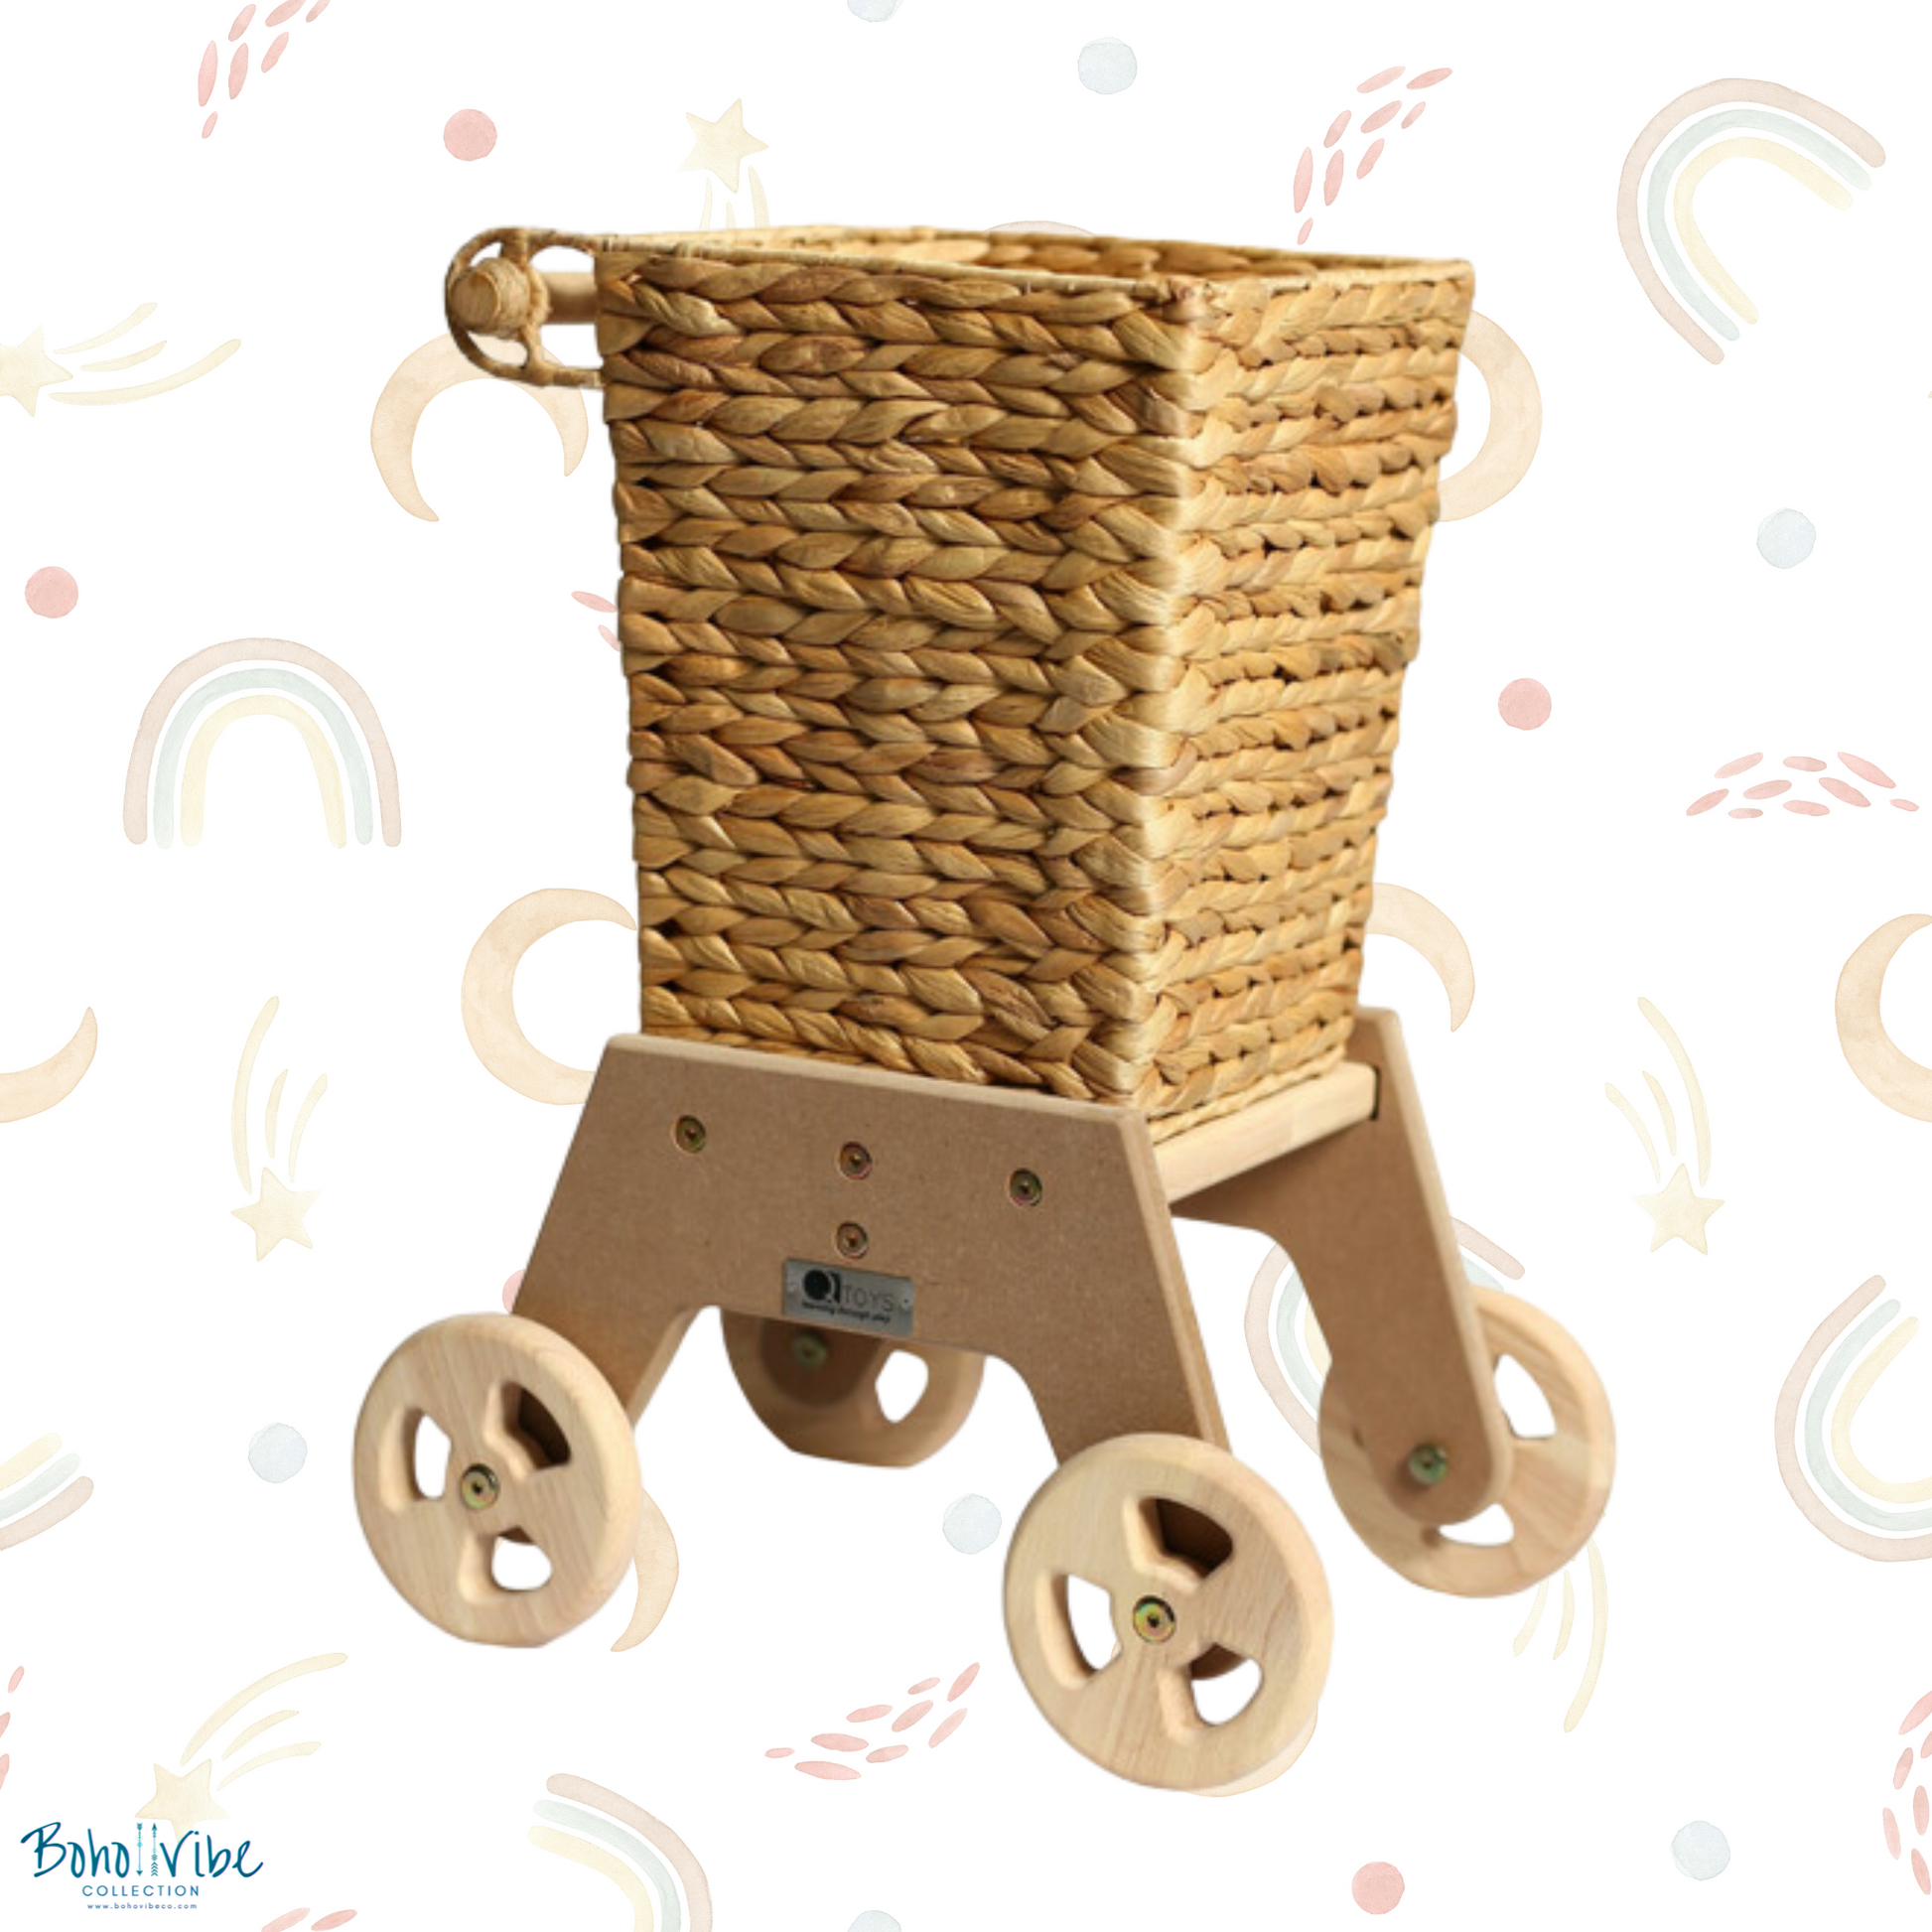 Whimsical Woven Wicker Shopping Trolley ↡